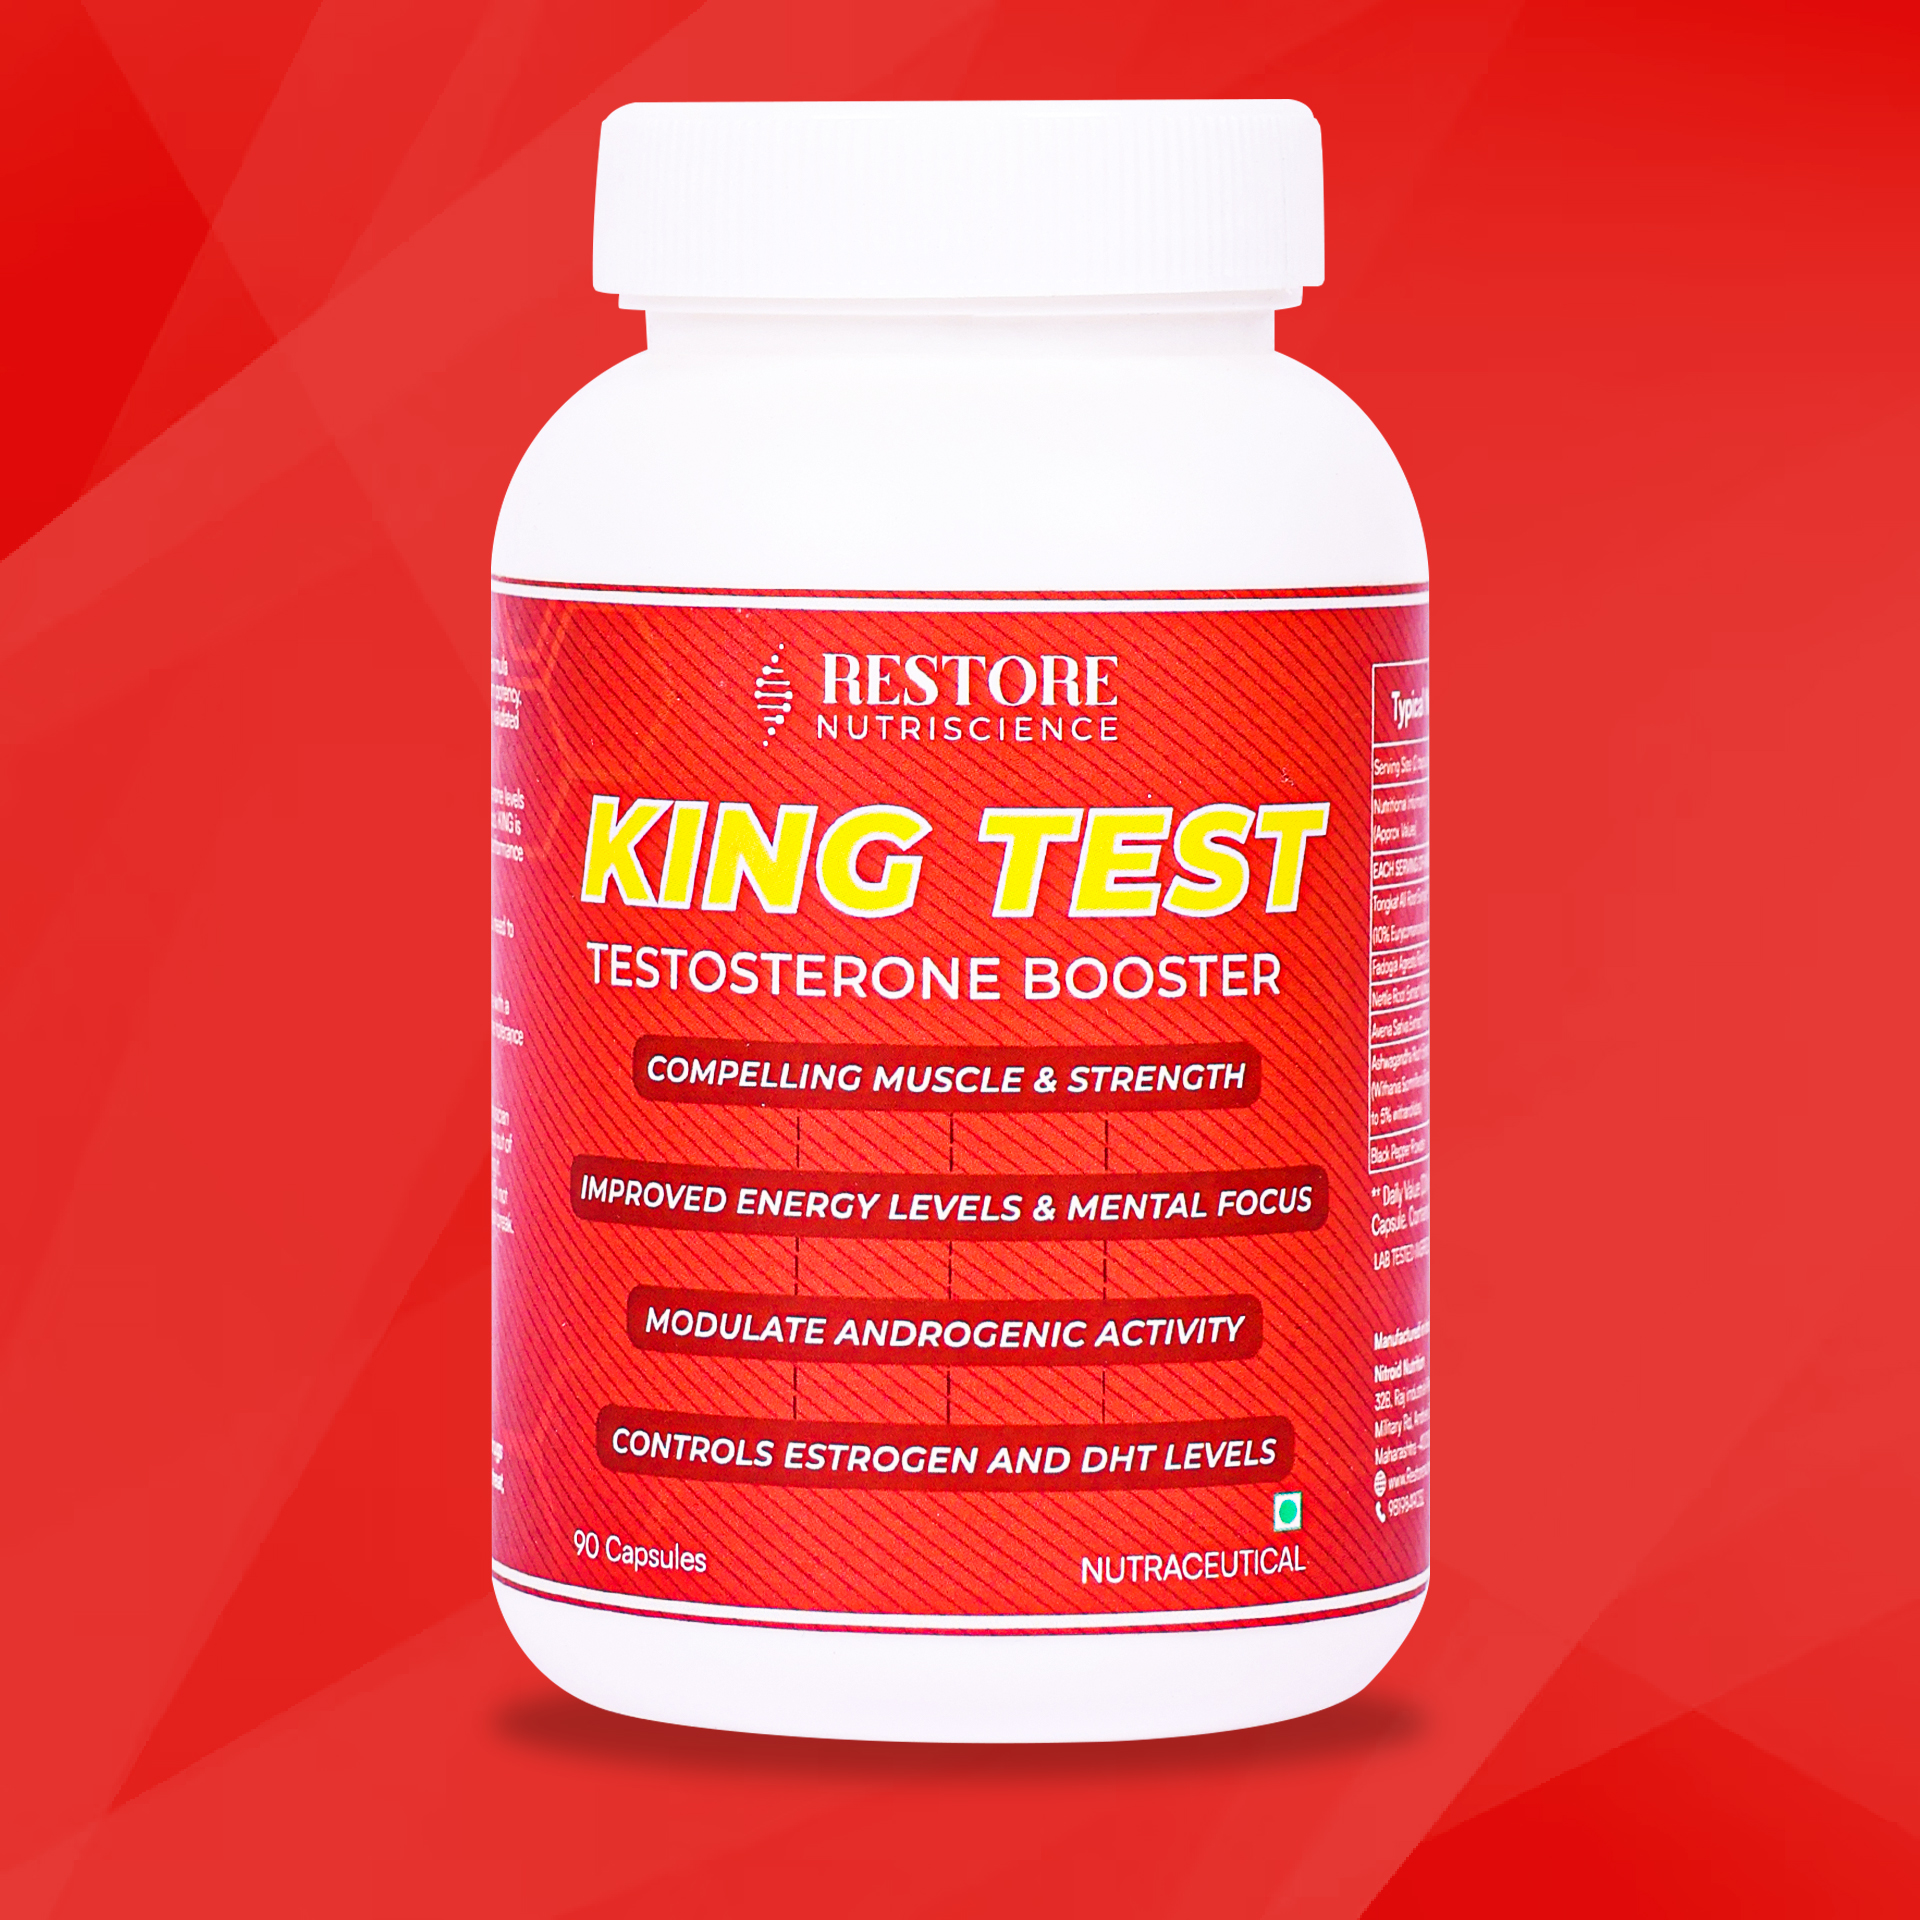 King Test Testosterone Booster